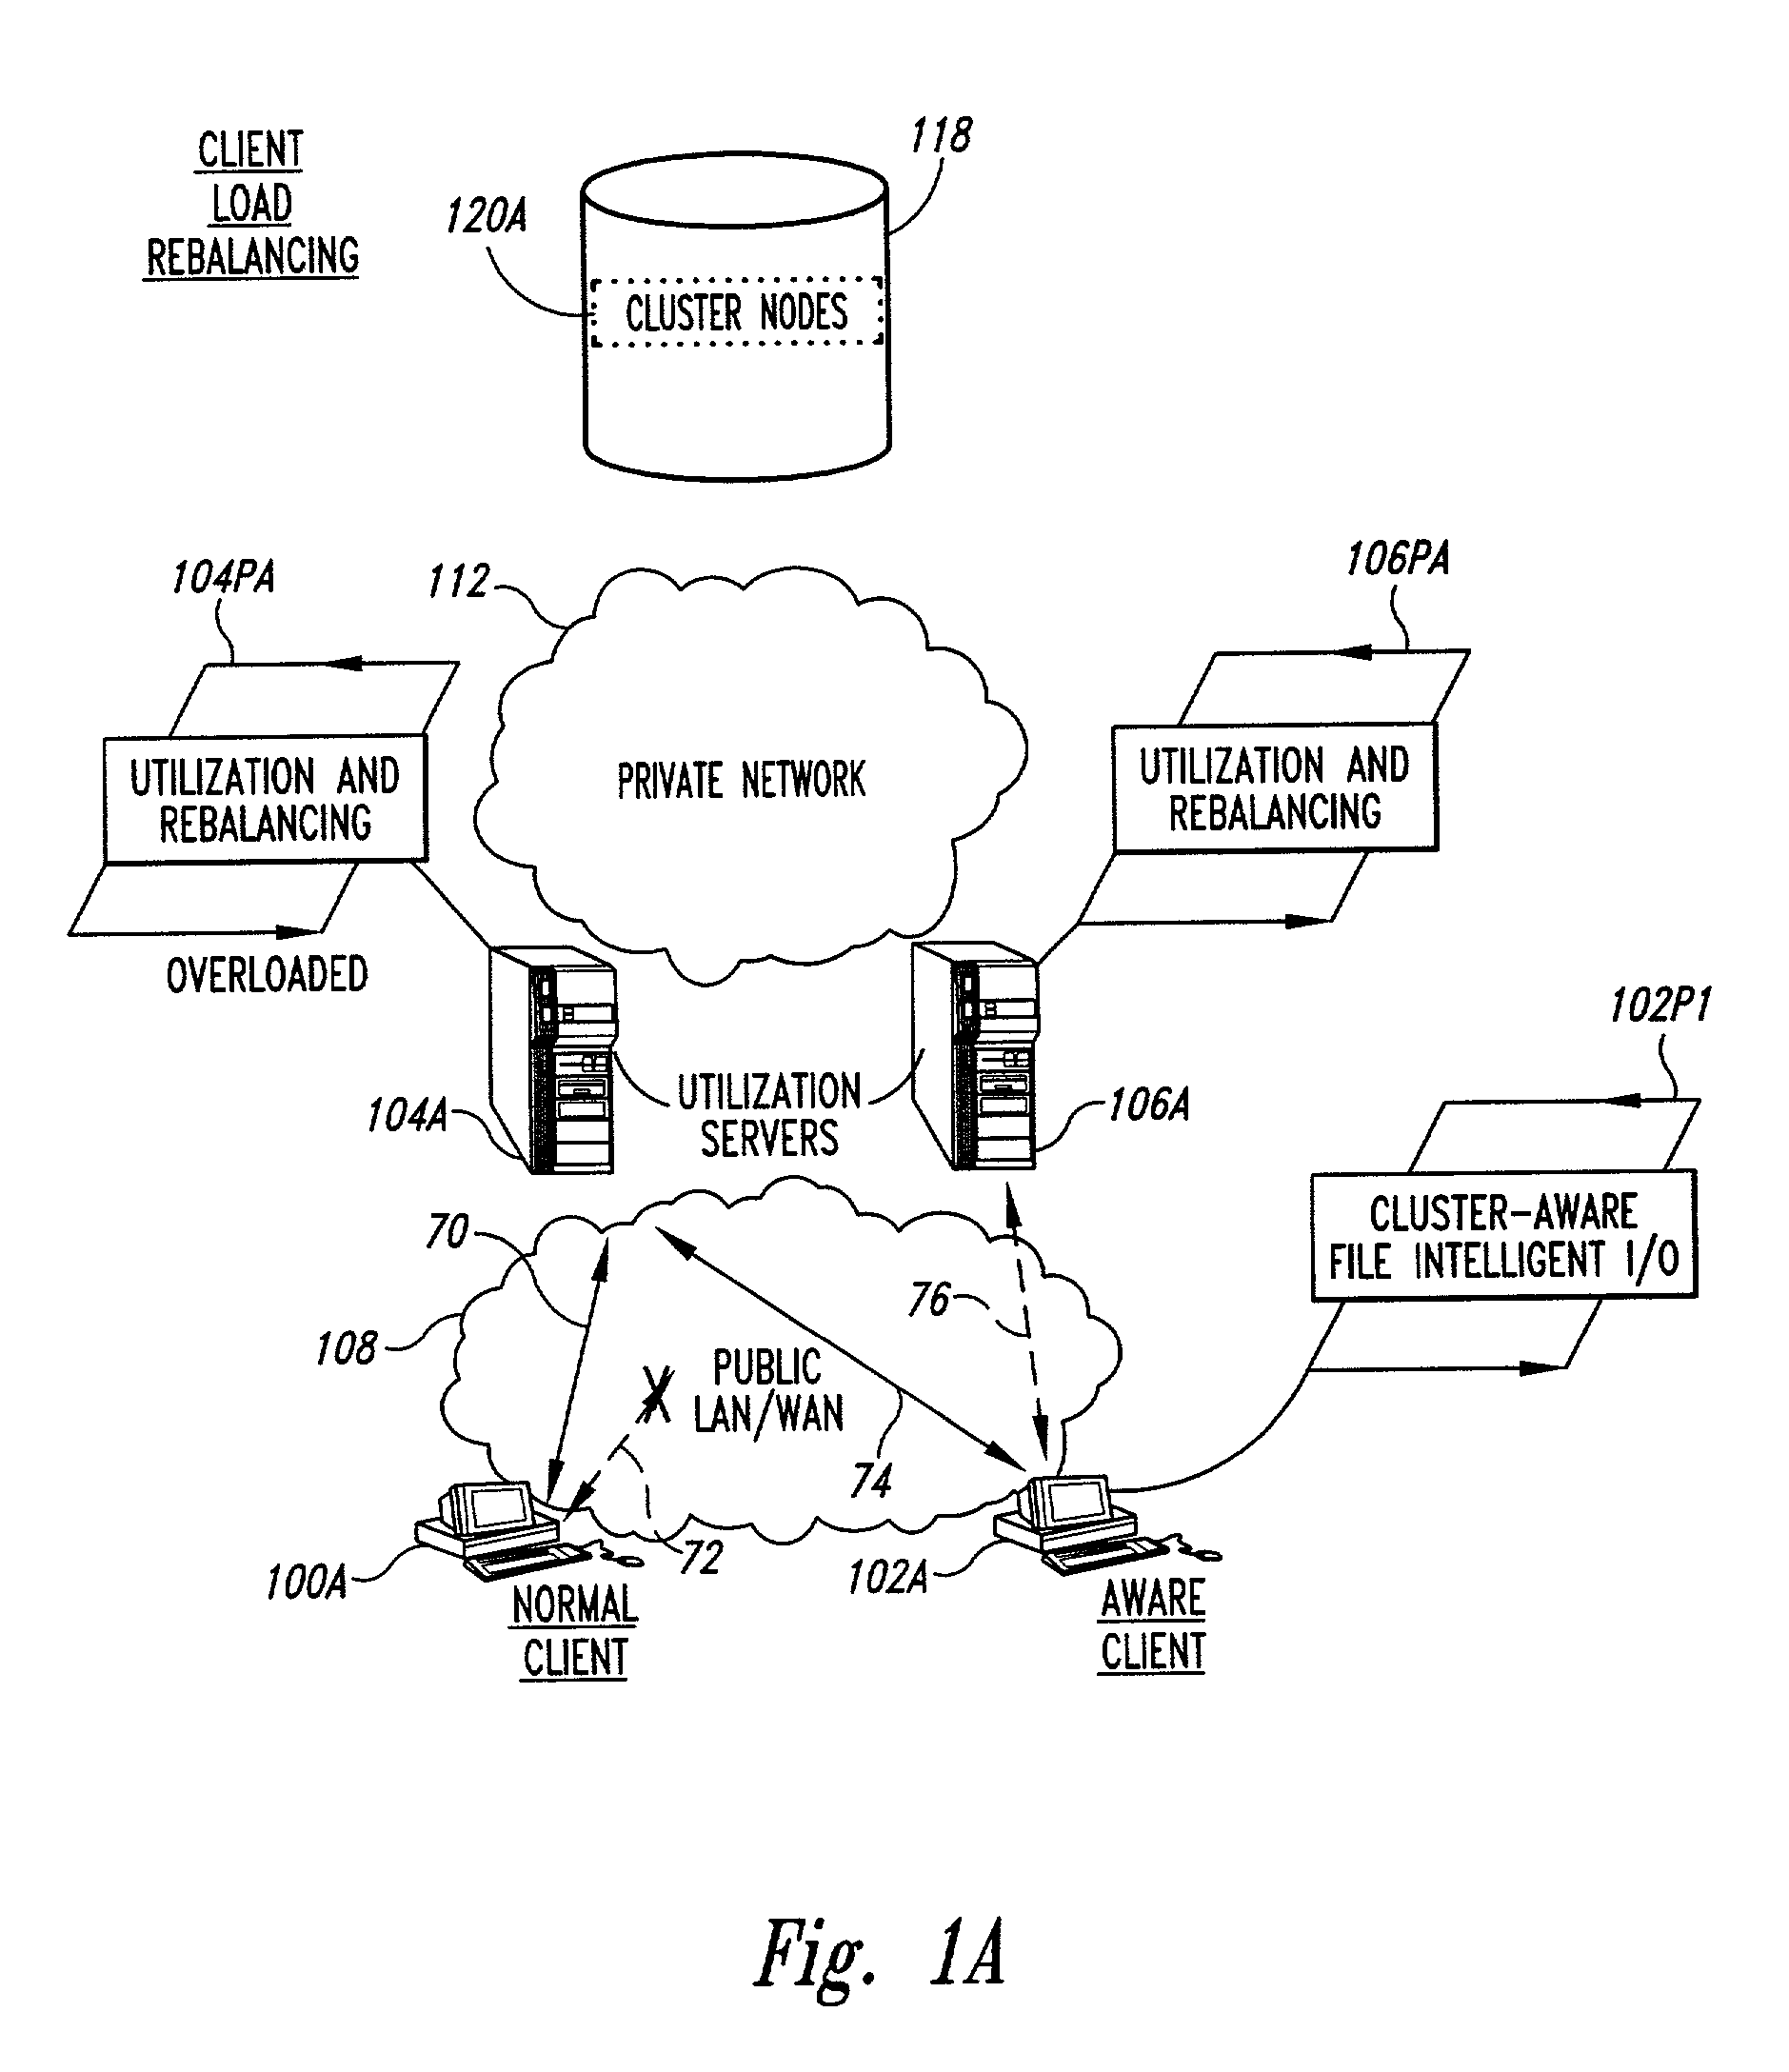 Dynamic load balancing of a network of client and server computer